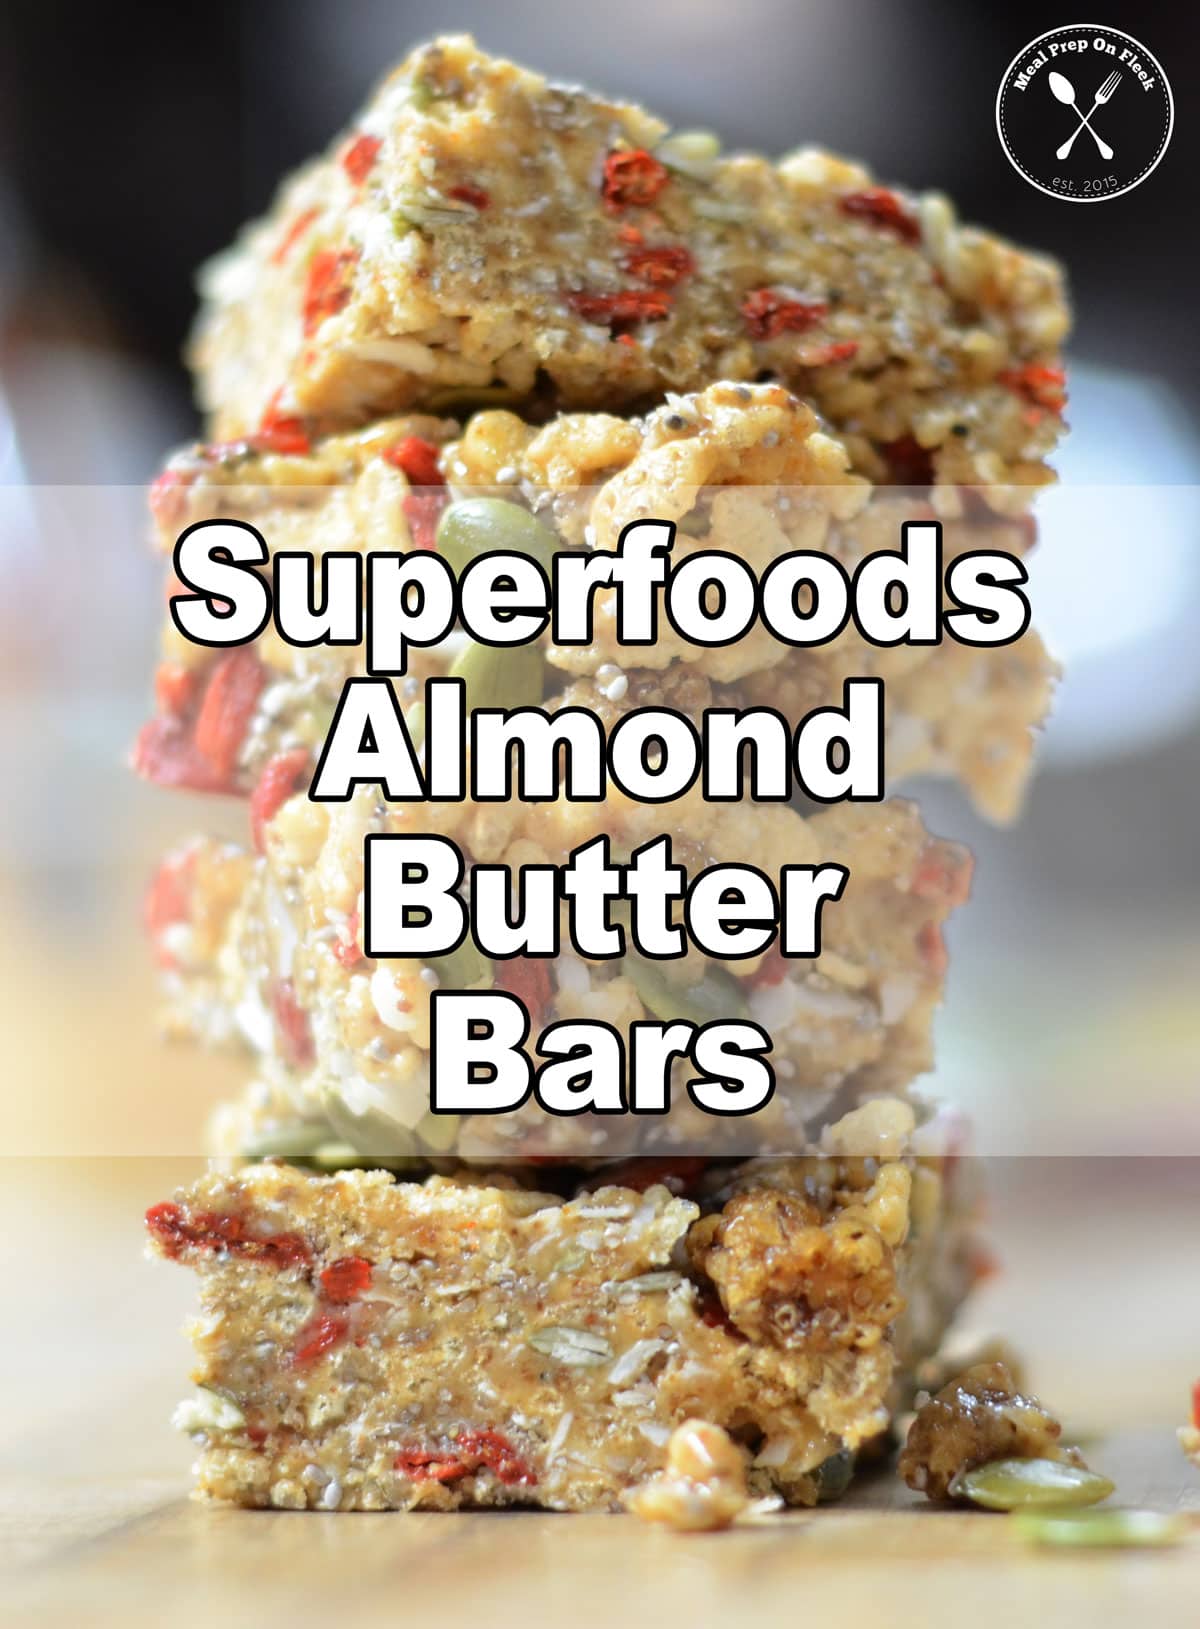 Superfoods Almond Butter Bars